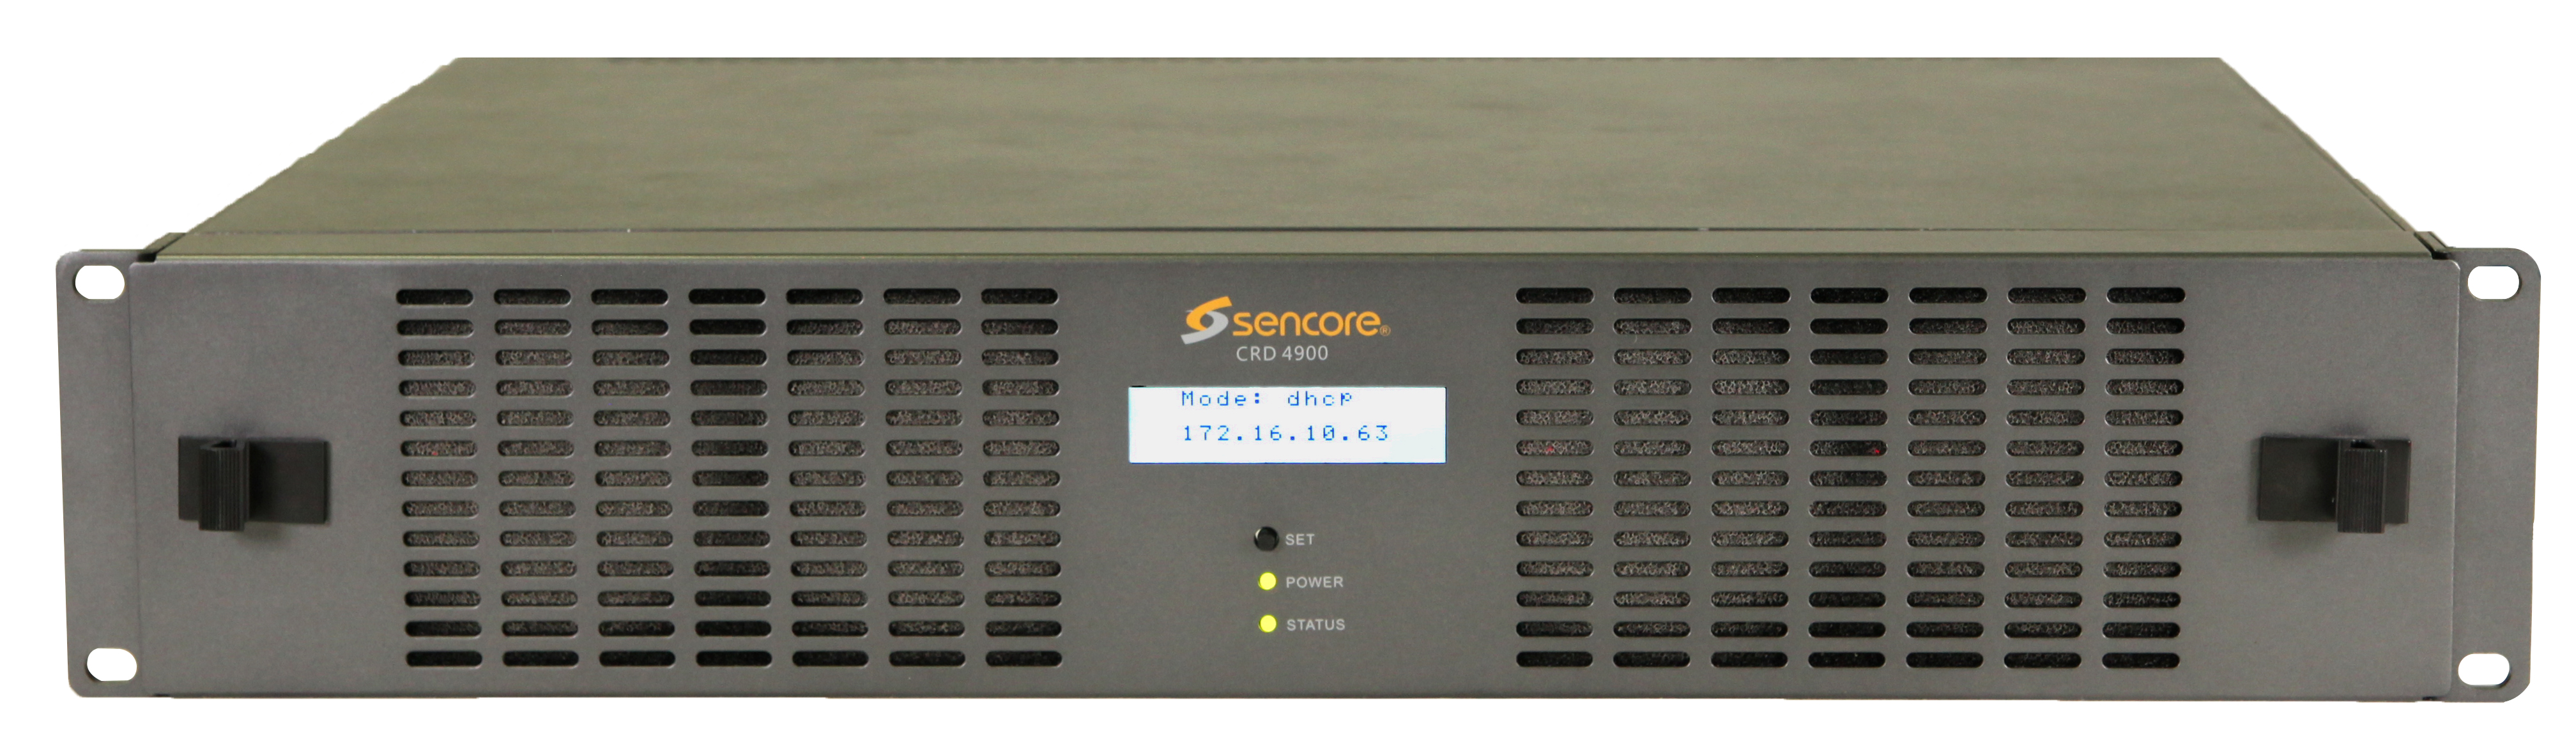 Sencore Releases New 10-Slot Chassis for Receiver Decoders